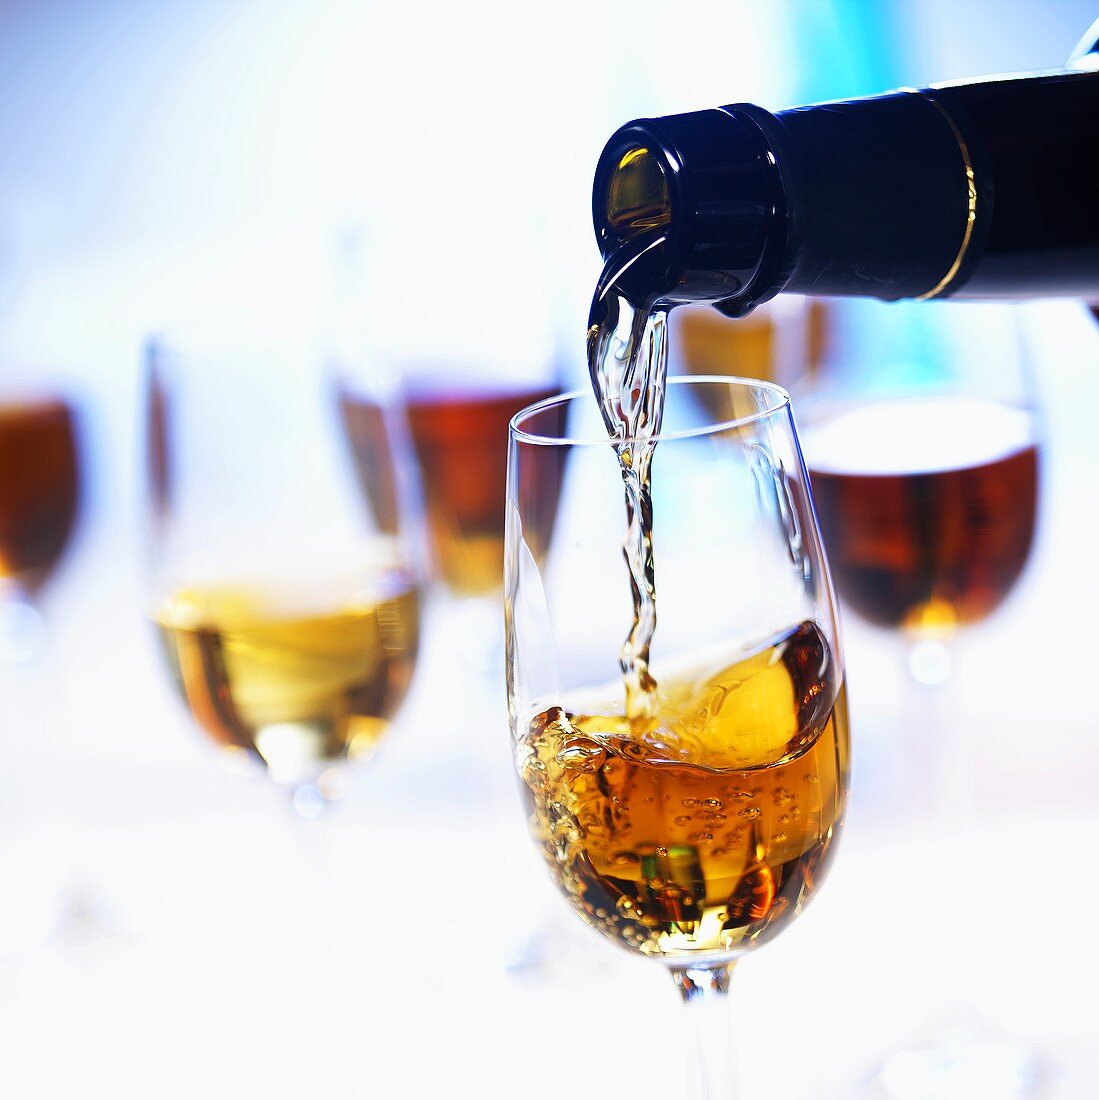 Pouring sherry into a glass